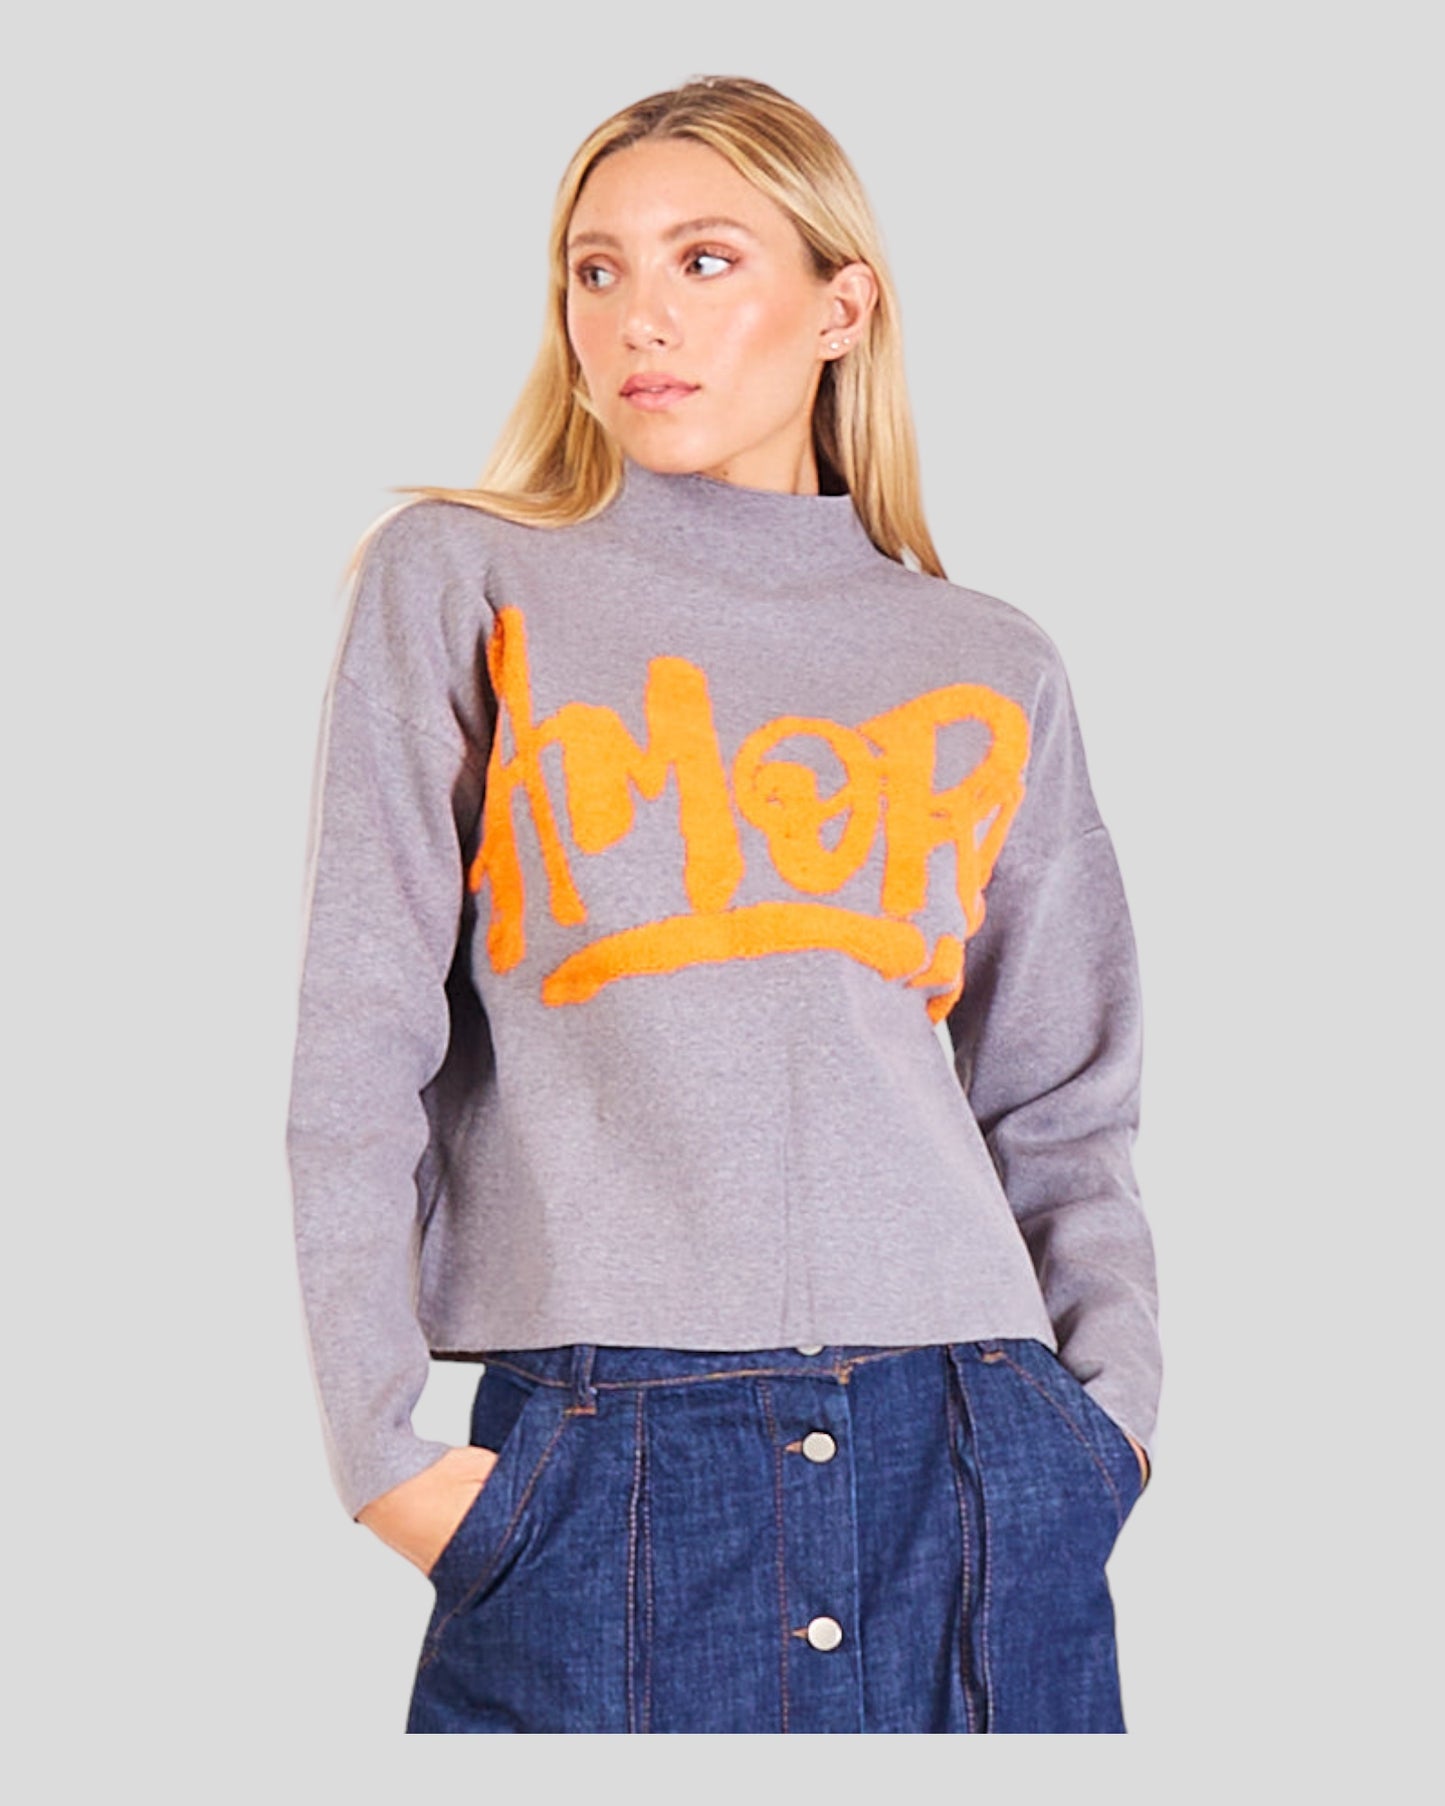 Sporty Sweater designed for dynamic style and chic comfort. Featuring large 'Amor' writing on the front, this sweater makes a bold statement. The slightly high collar adds a modern twist while ensuring coziness.